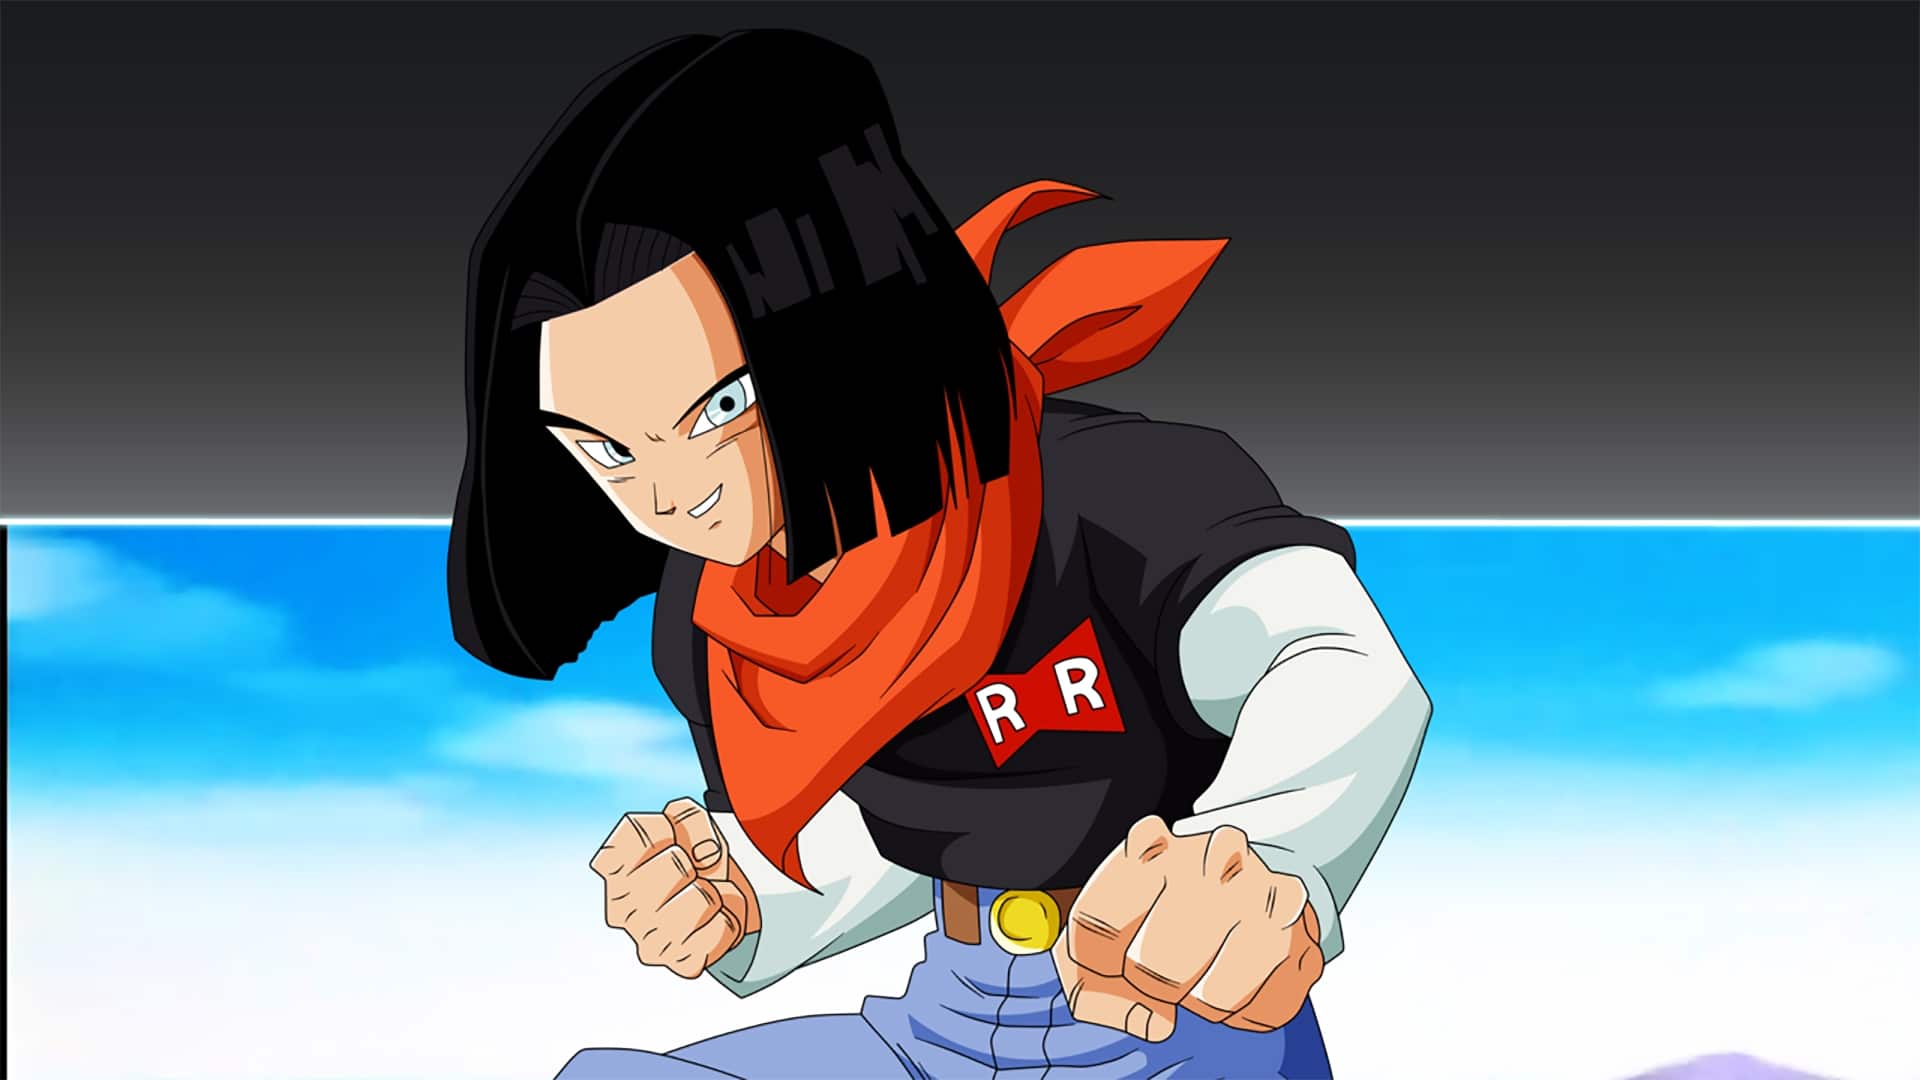 android_17-Androide 17 -Dragon ball super-GamersRD